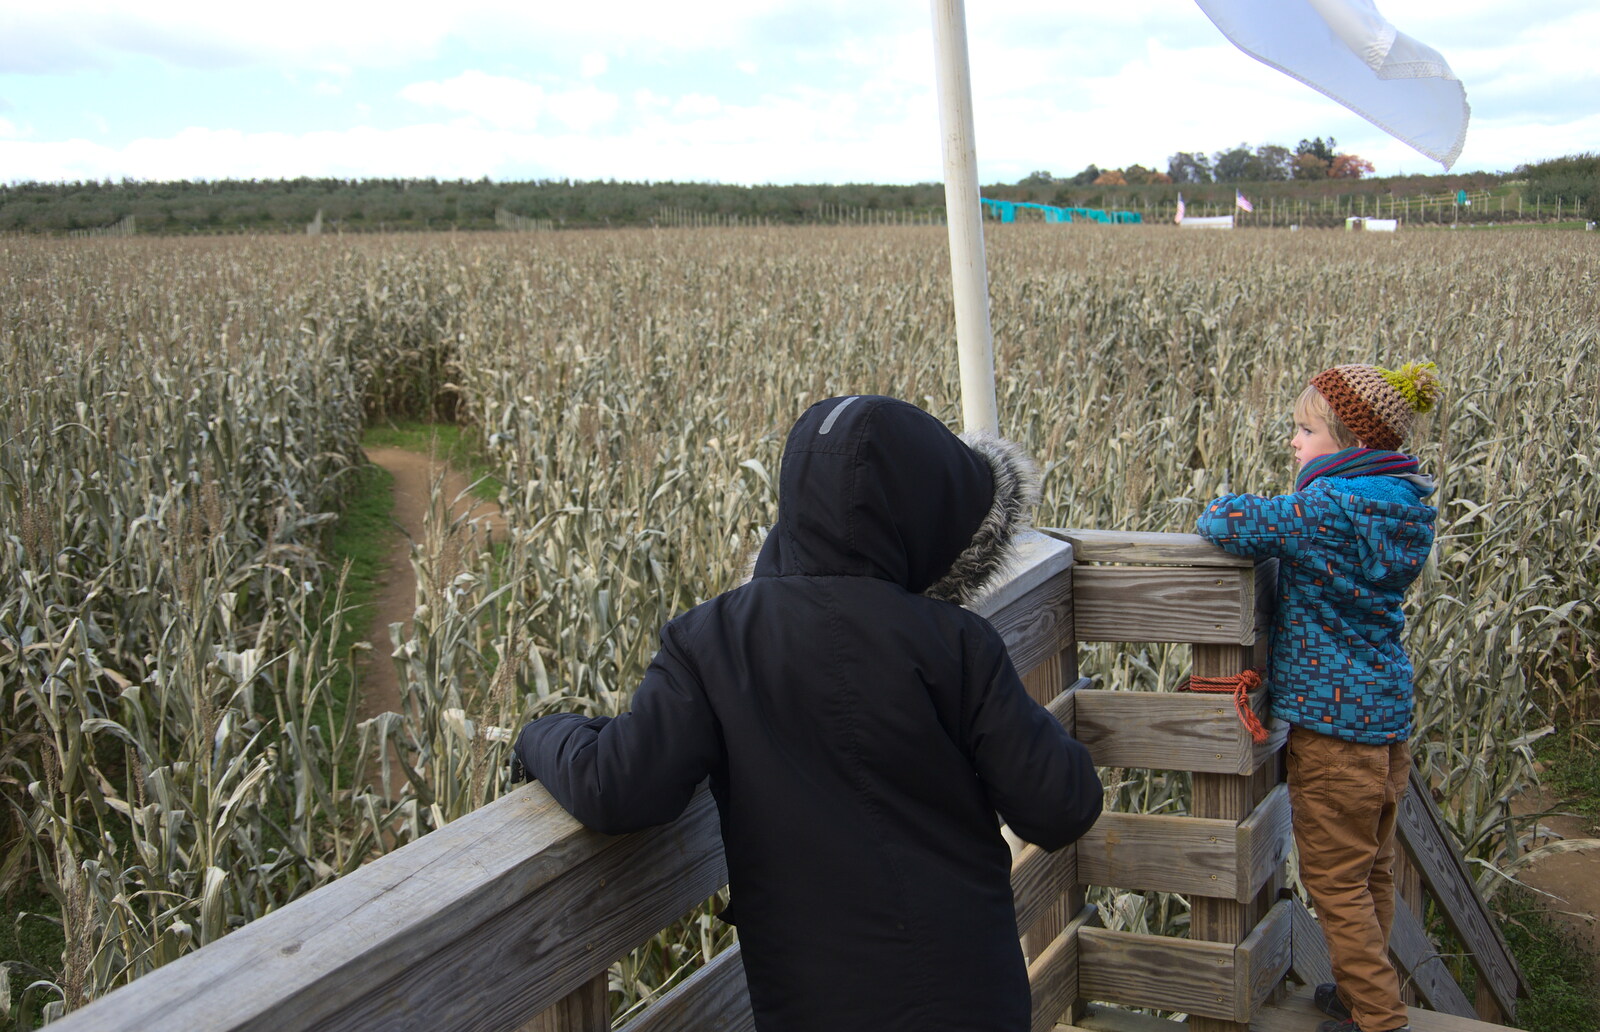 Fred and Harry look out over the maize from Pumpkin Picking at Alstede Farm, Chester, Morris County, New Jersey - 24th October 2018